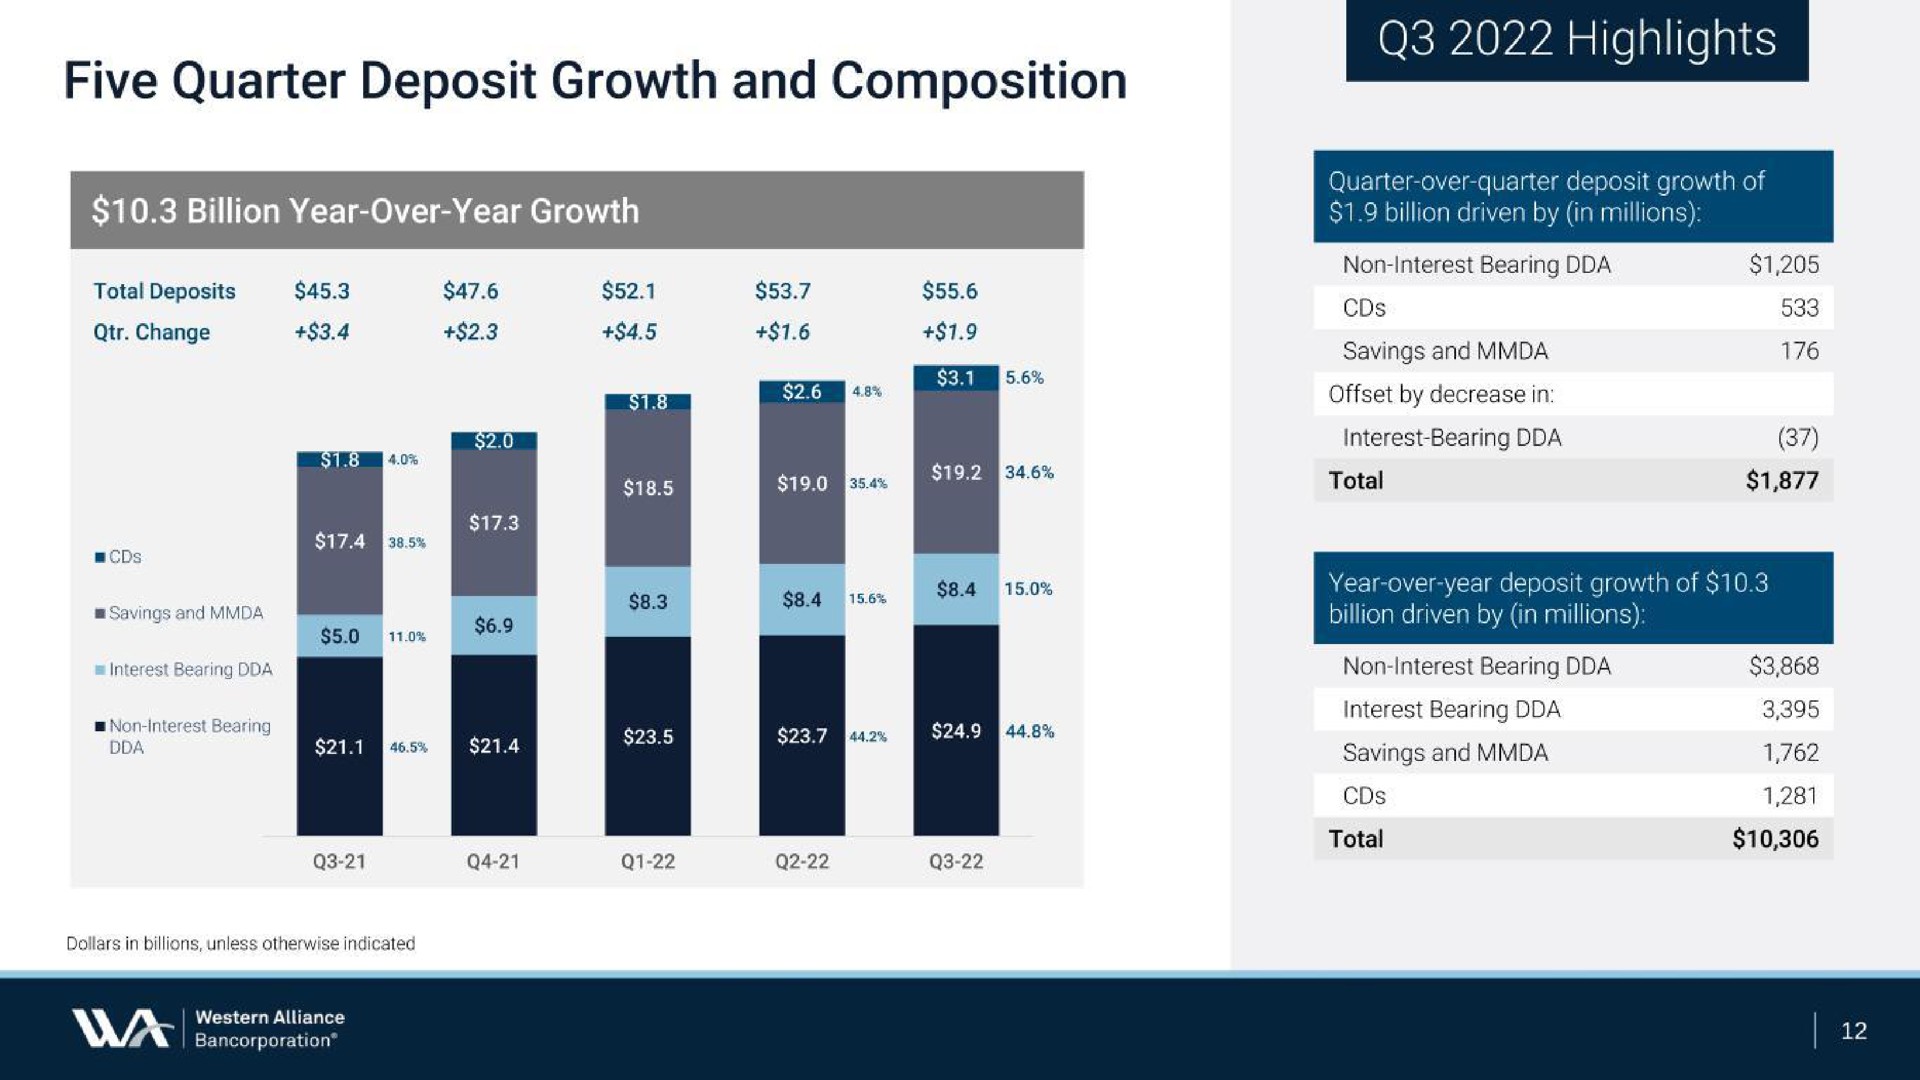 five quarter deposit growth and composition highlights | Western Alliance Bancorporation